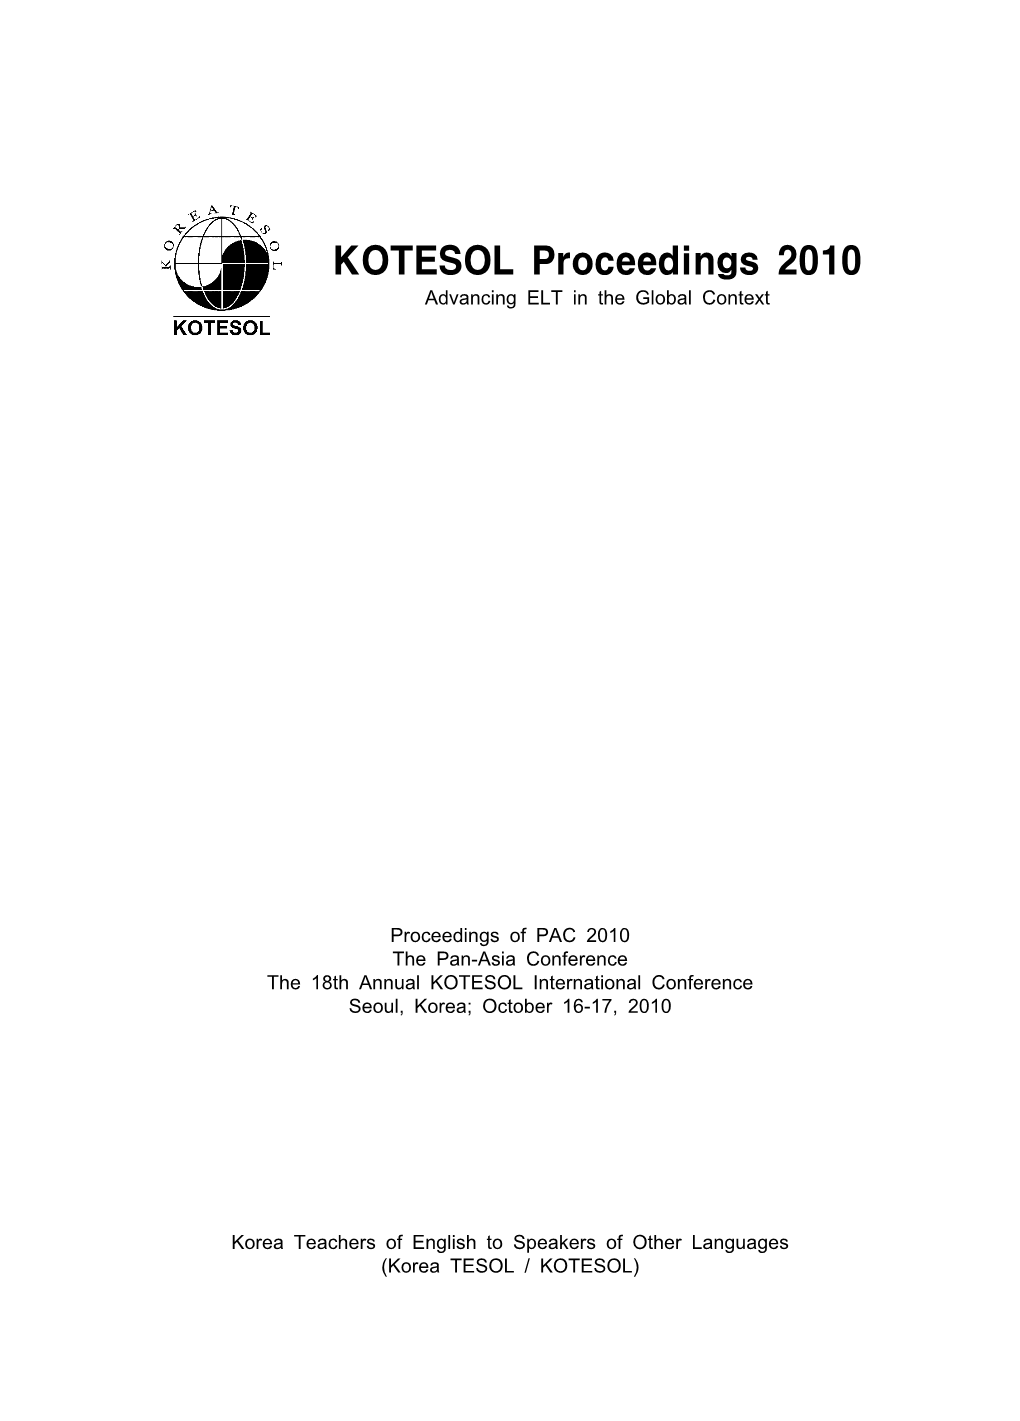 KOTESOL Proceedings 2010 Advancing ELT in the Global Context